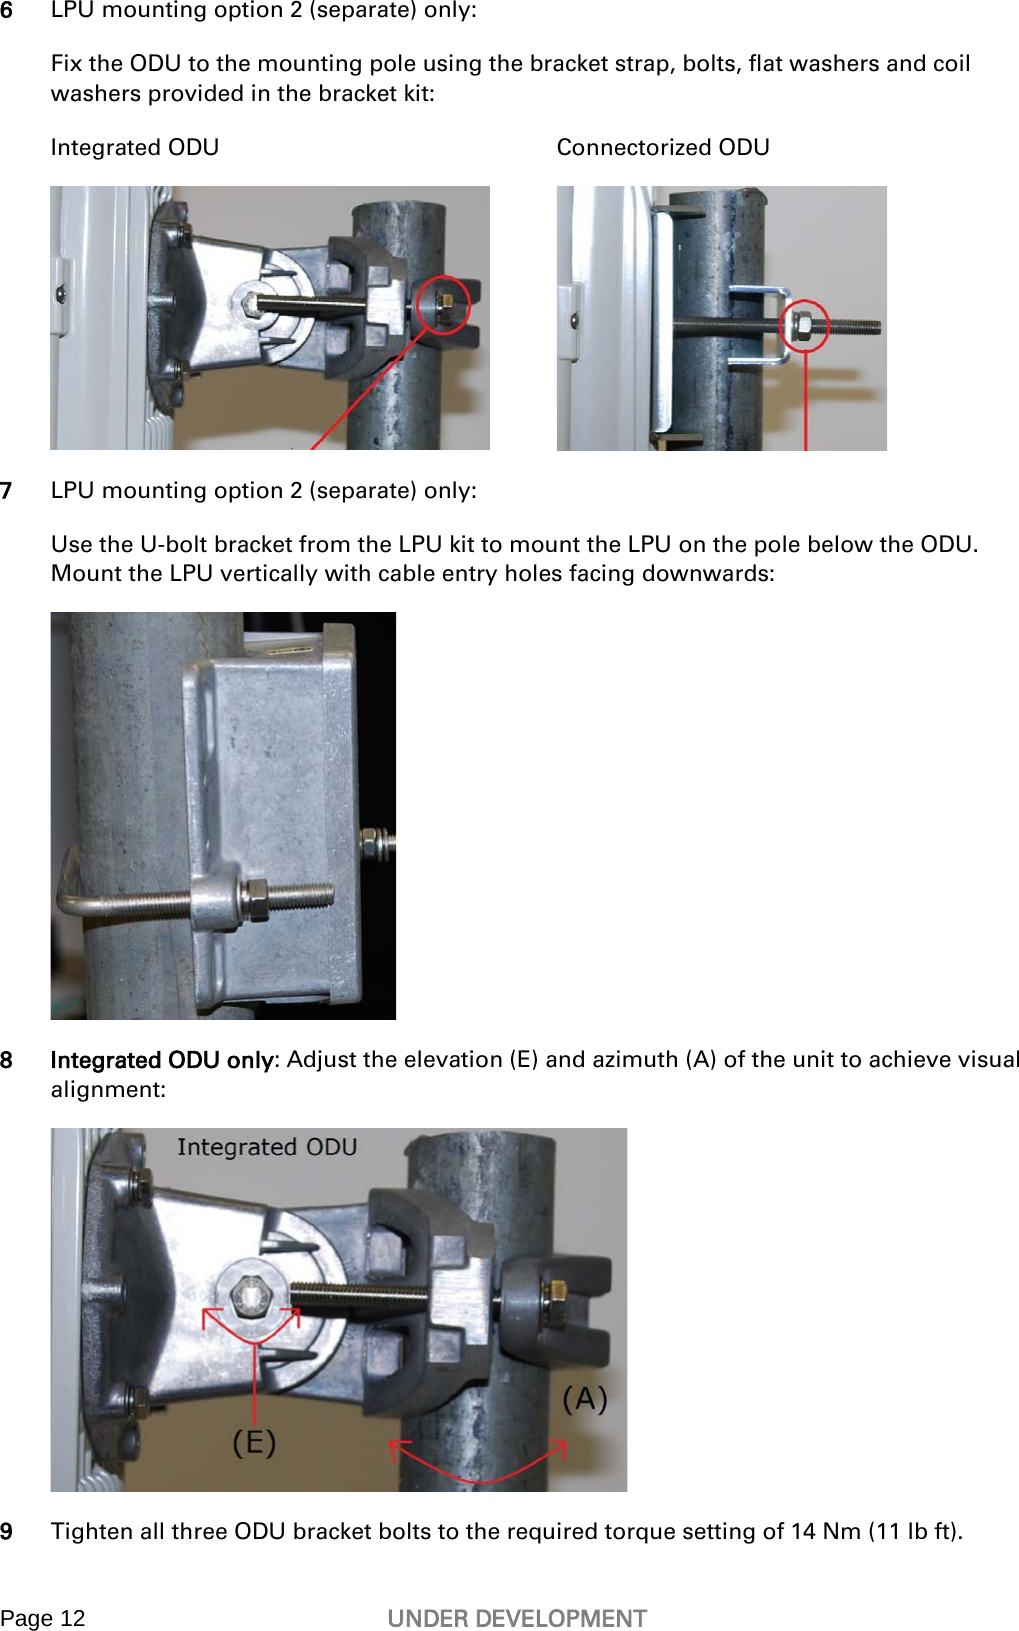  Page 12 UNDER DEVELOPMENT   6 LPU mounting option 2 (separate) only: Fix the ODU to the mounting pole using the bracket strap, bolts, flat washers and coil washers provided in the bracket kit:  Integrated ODU  Connectorized ODU  7 LPU mounting option 2 (separate) only: Use the U-bolt bracket from the LPU kit to mount the LPU on the pole below the ODU. Mount the LPU vertically with cable entry holes facing downwards:  8 Integrated ODU only: Adjust the elevation (E) and azimuth (A) of the unit to achieve visual alignment:   9 Tighten all three ODU bracket bolts to the required torque setting of 14 Nm (11 lb ft).  